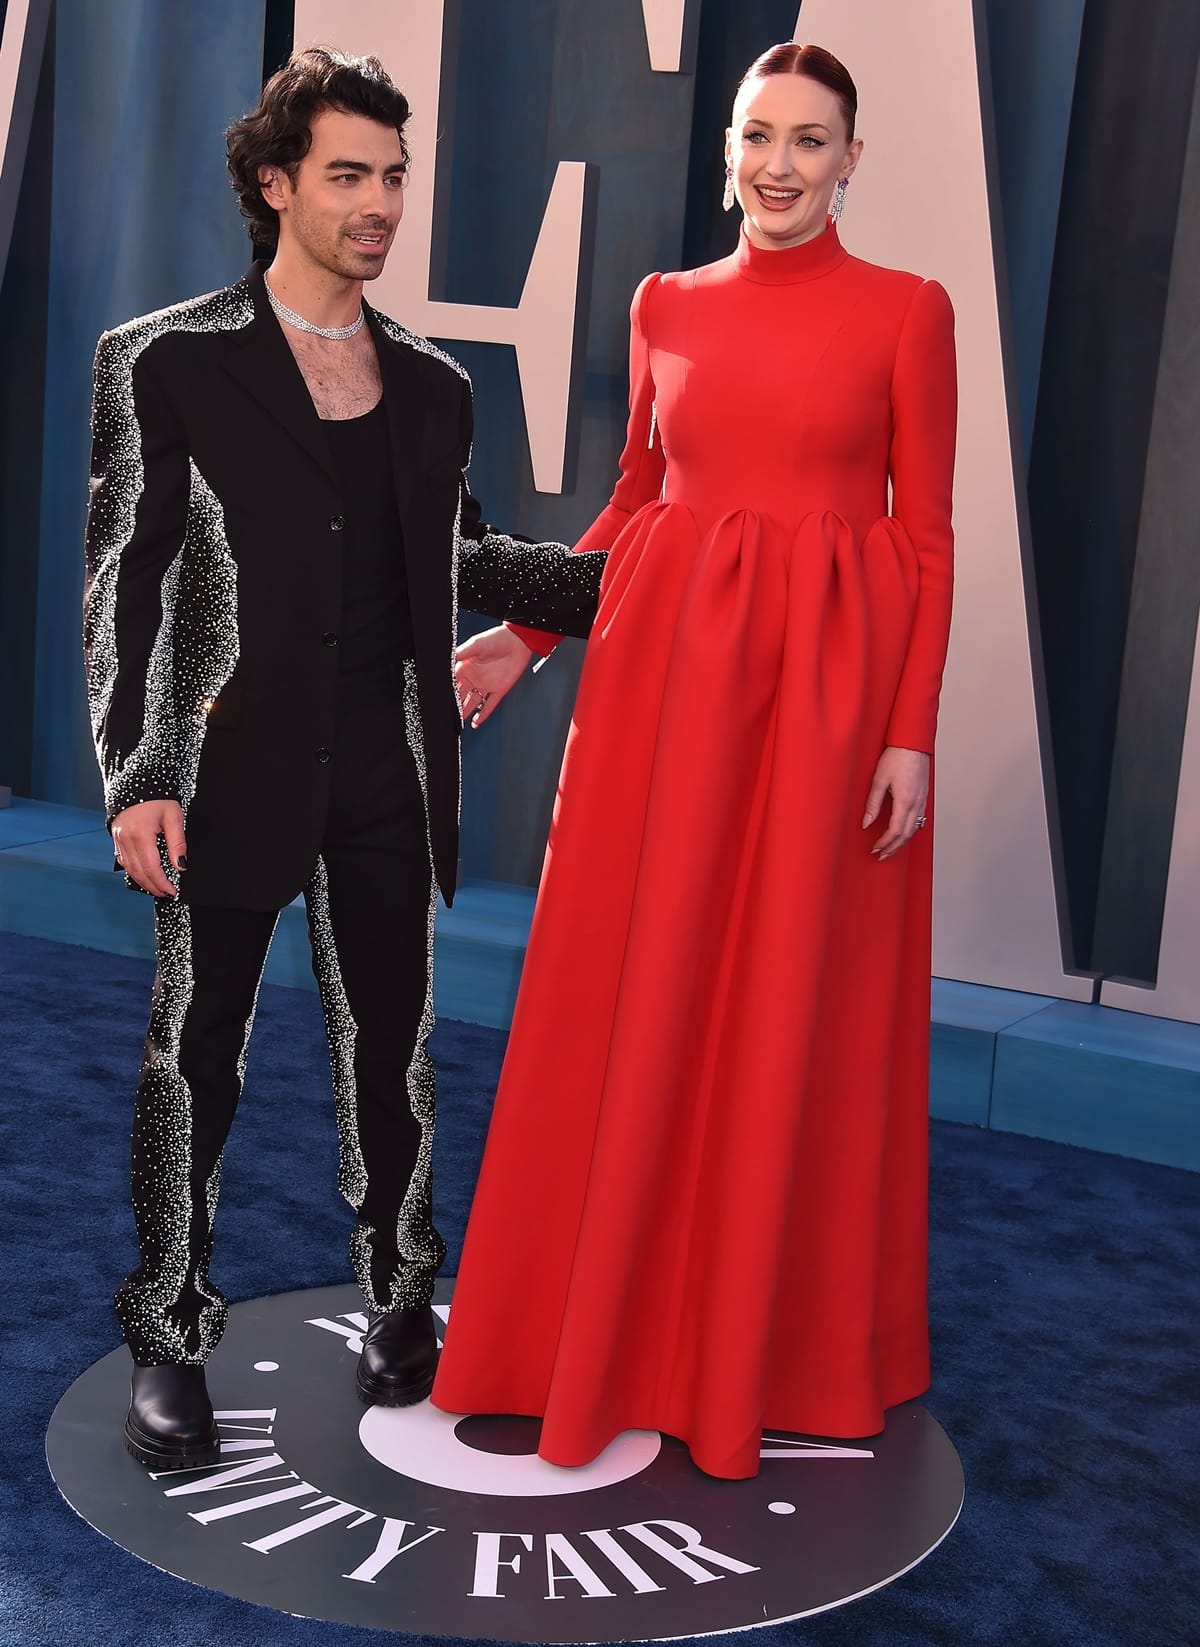 Sophie Turner in a red dress and Joe Jonas in a wool suit at the 2022 Vanity Fair Oscar Party